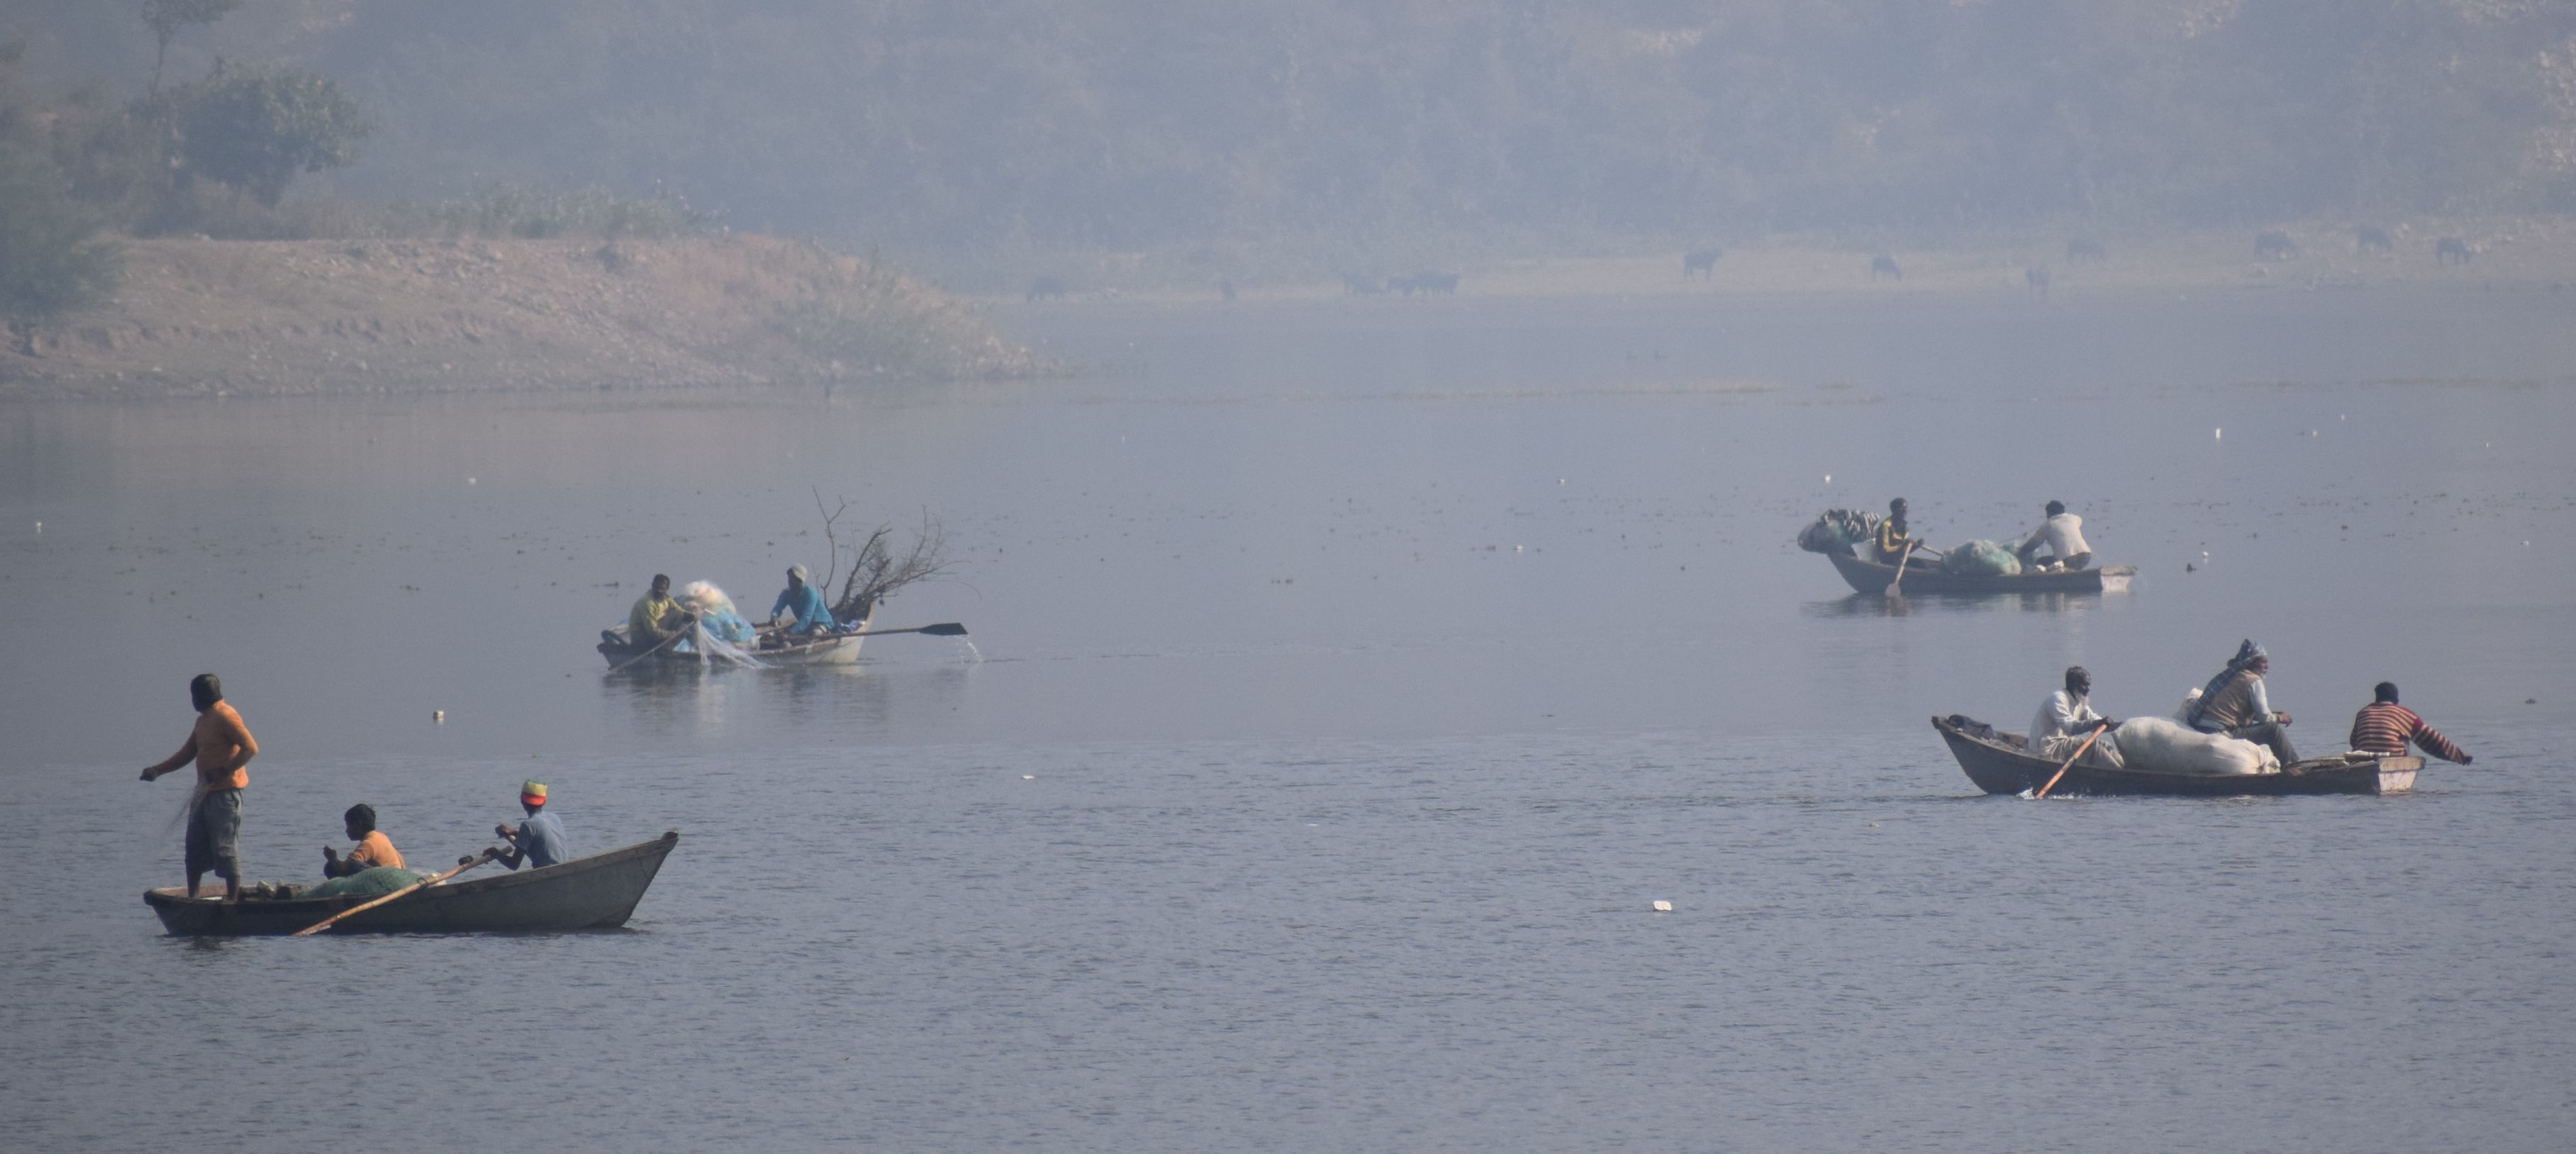 Siliserh Lake : Boats Are Trapping Into Net of Fisherman